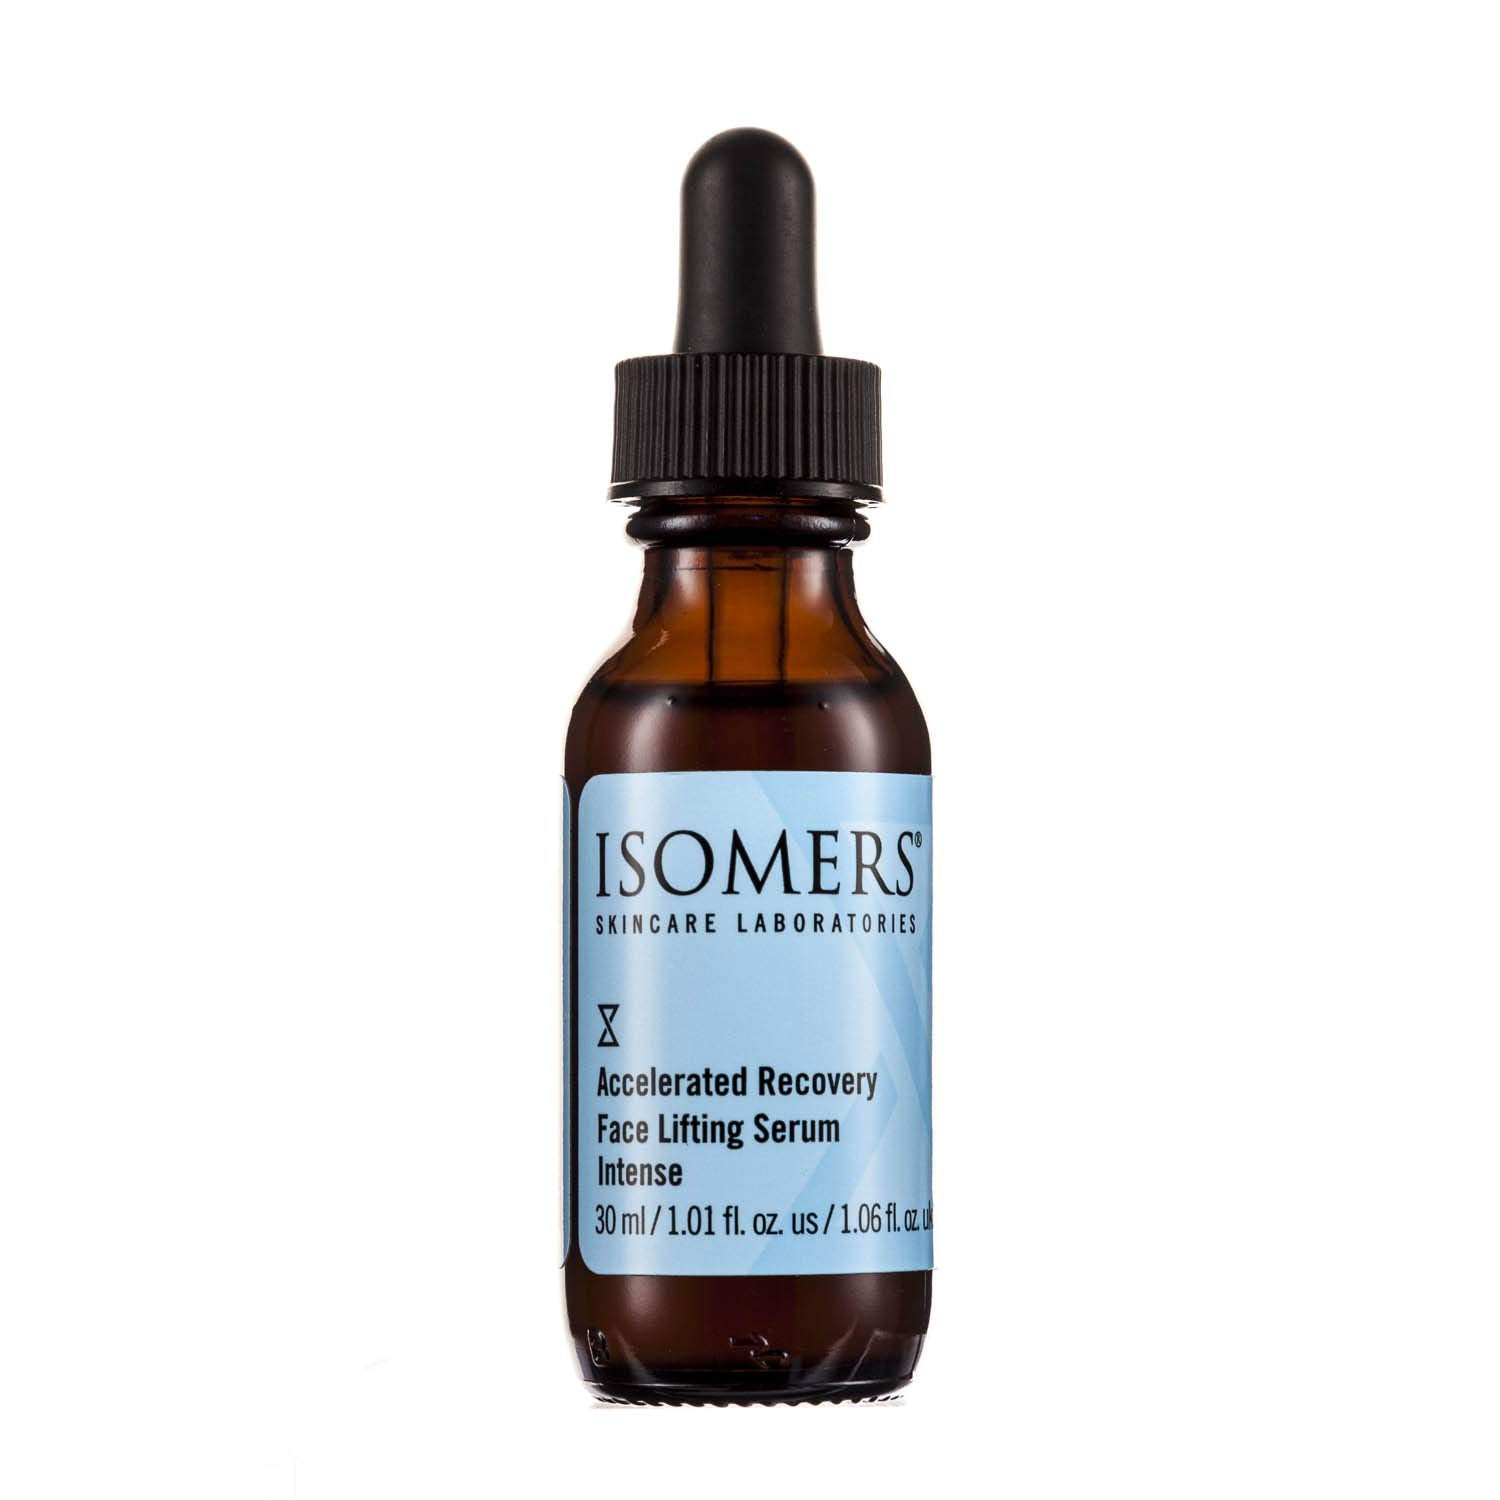 ISOMERS Accelerated Recovery Face Lifting Serum Intense - Skin Lifting & Boot Camp System, Younger, Firmer & Smoother Looking Skin, 30